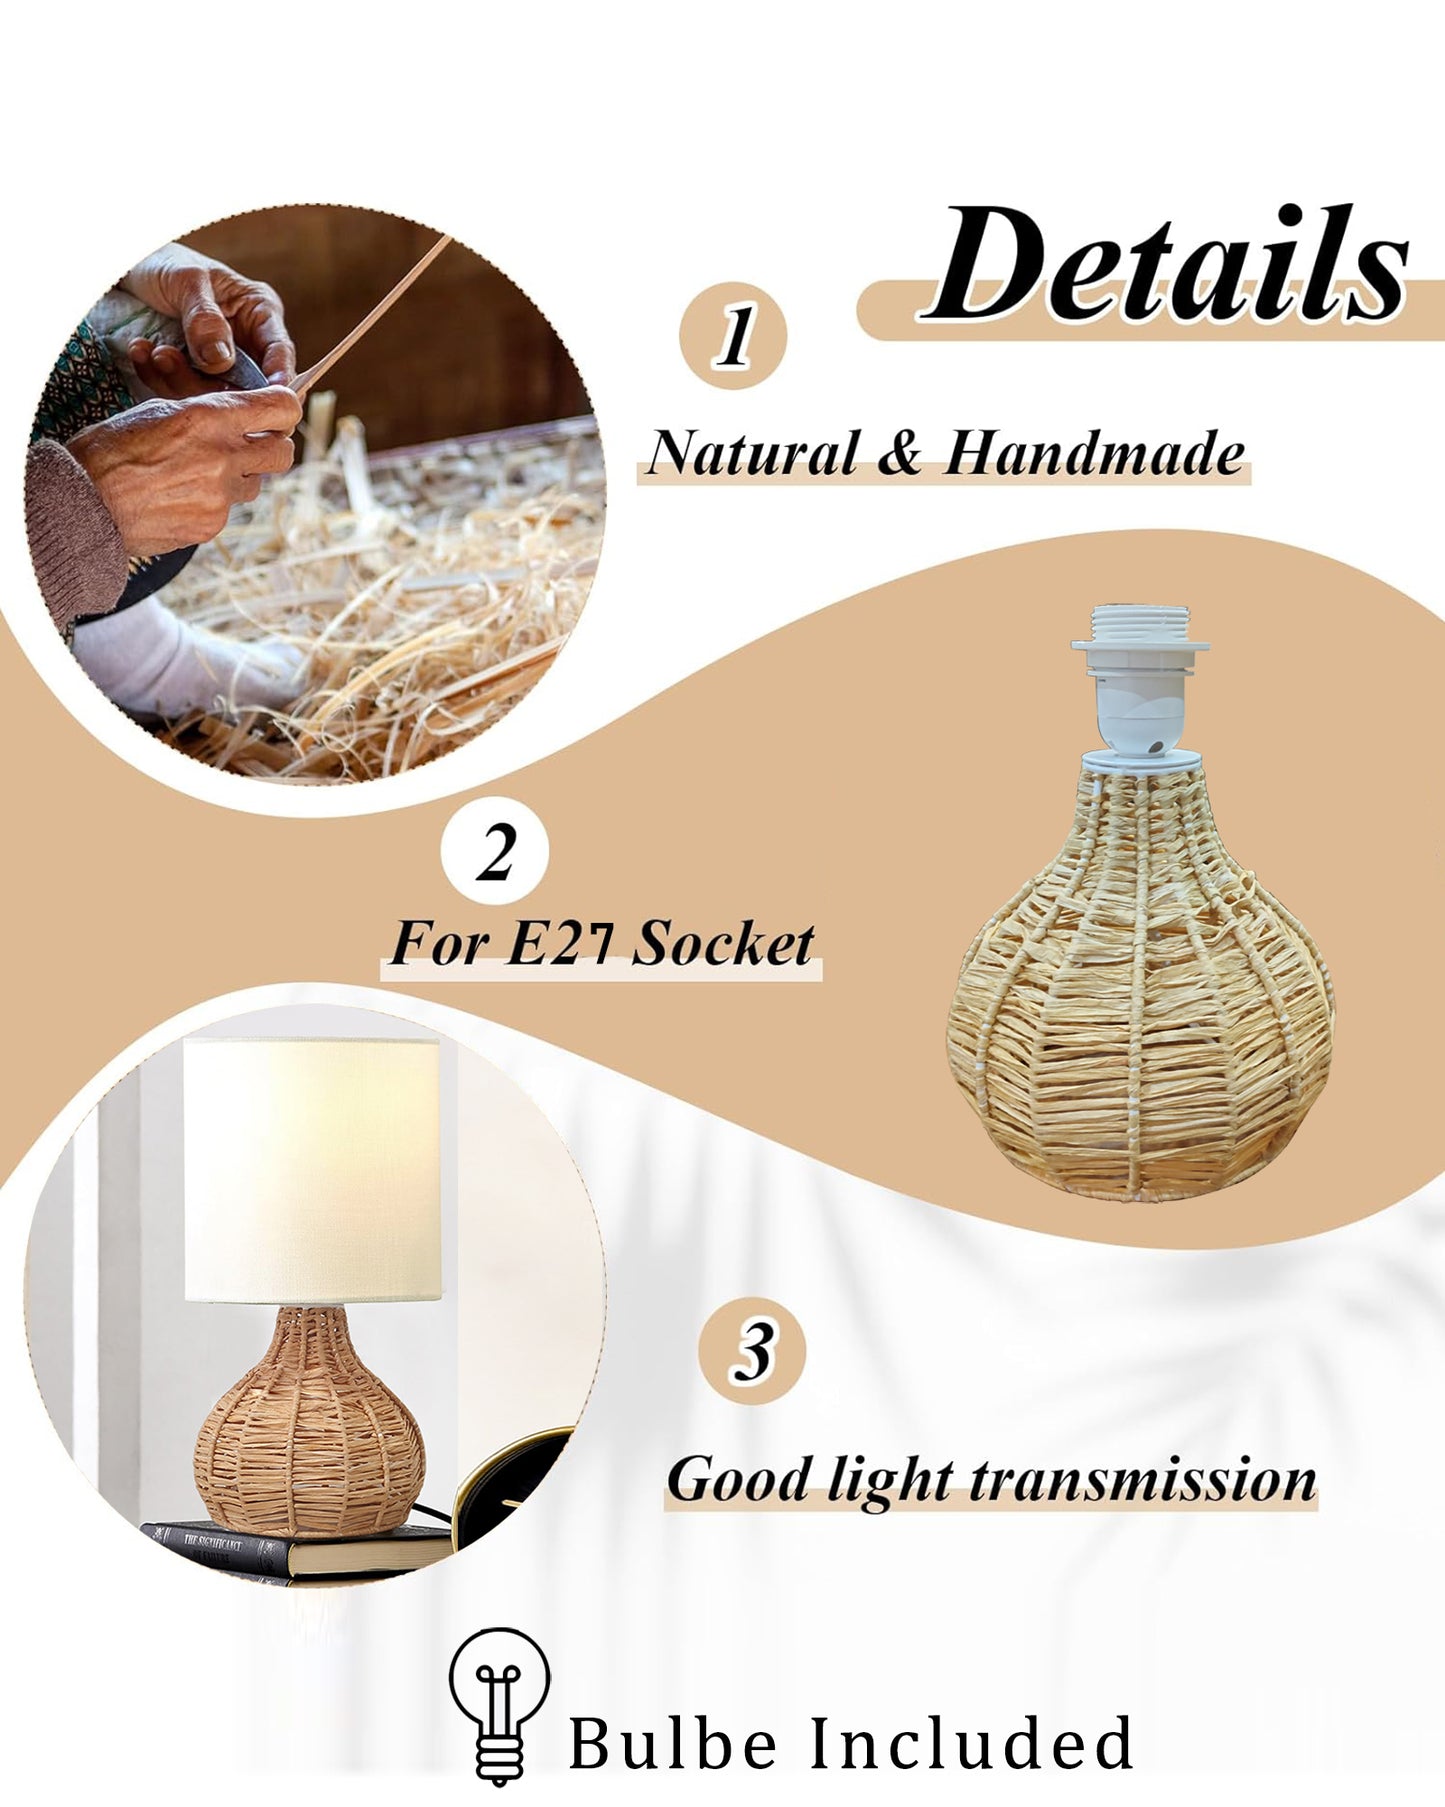 Raffia Rattan Table Lamp, Small Nightstand Lamp with Linen Fabric Lampshade, Desk Lamp Bedside Lamp for Living Room Home Office , Spinning